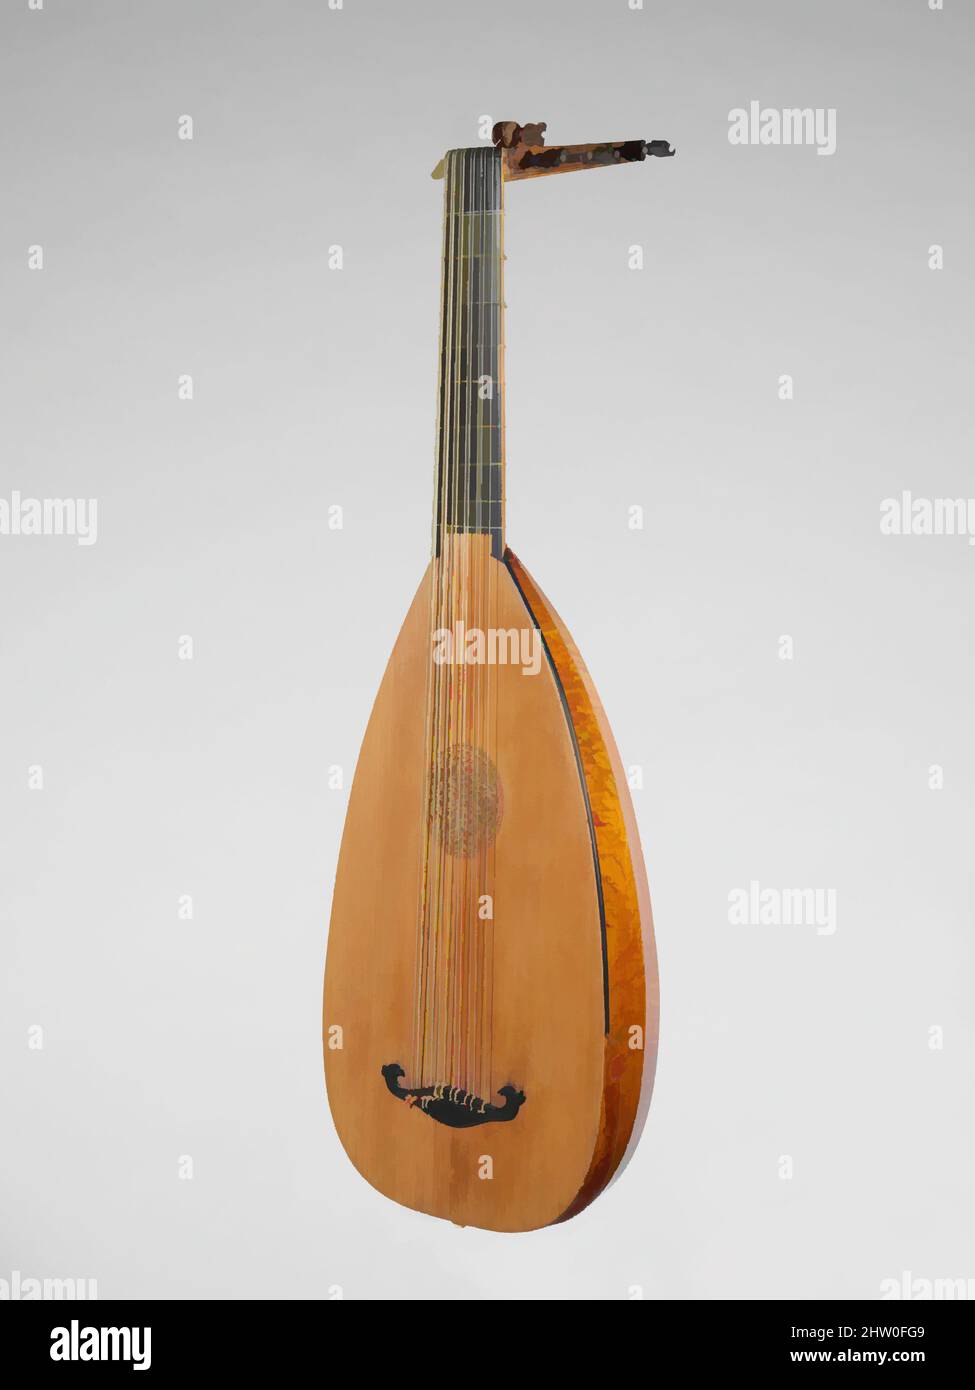 Art inspired by Mandora, 1726, Augsburg, Germany, German, Maple, spruce, ebony, L. to nut77.1cm (30.35 in.);String L.: Minimum 67.5 cm (26.58 in.); L. of top 48.5 cm. (19.09 in.), Chordophone-Lute-plucked-fretted, Gregori Ferdinand Wenger, Classic works modernized by Artotop with a splash of modernity. Shapes, color and value, eye-catching visual impact on art. Emotions through freedom of artworks in a contemporary way. A timeless message pursuing a wildly creative new direction. Artists turning to the digital medium and creating the Artotop NFT Stock Photo